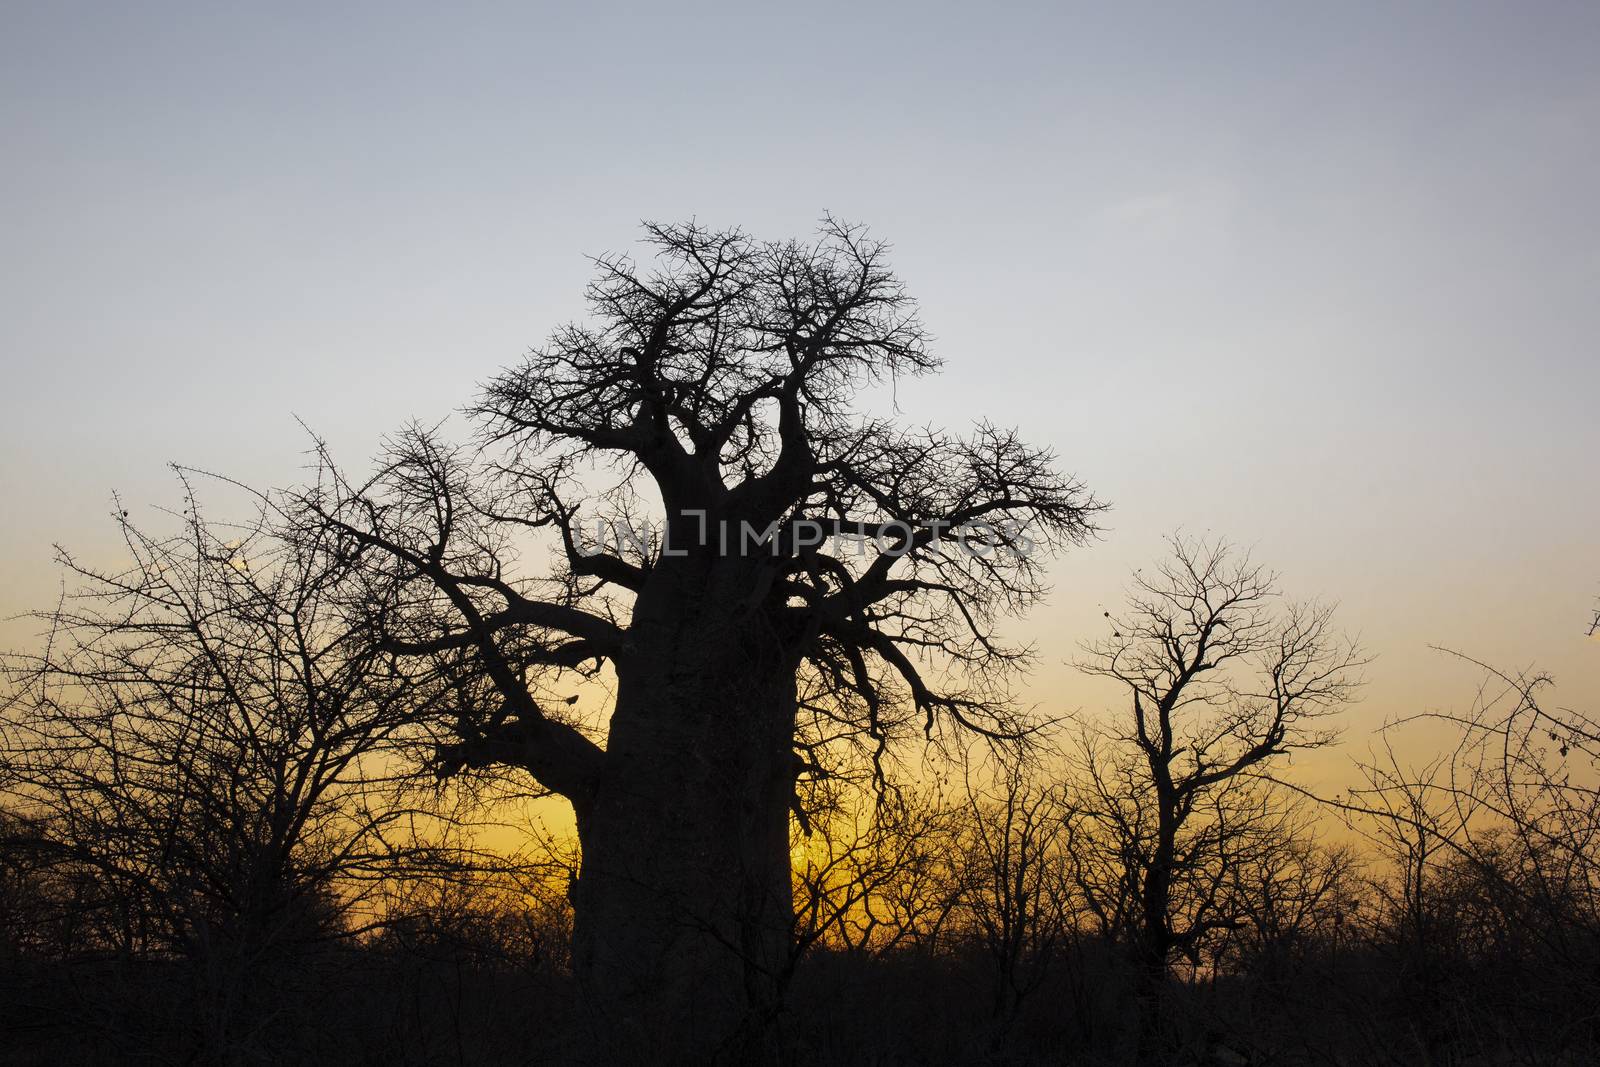 Sunrise at the Baobabs by Tjeerdkruse